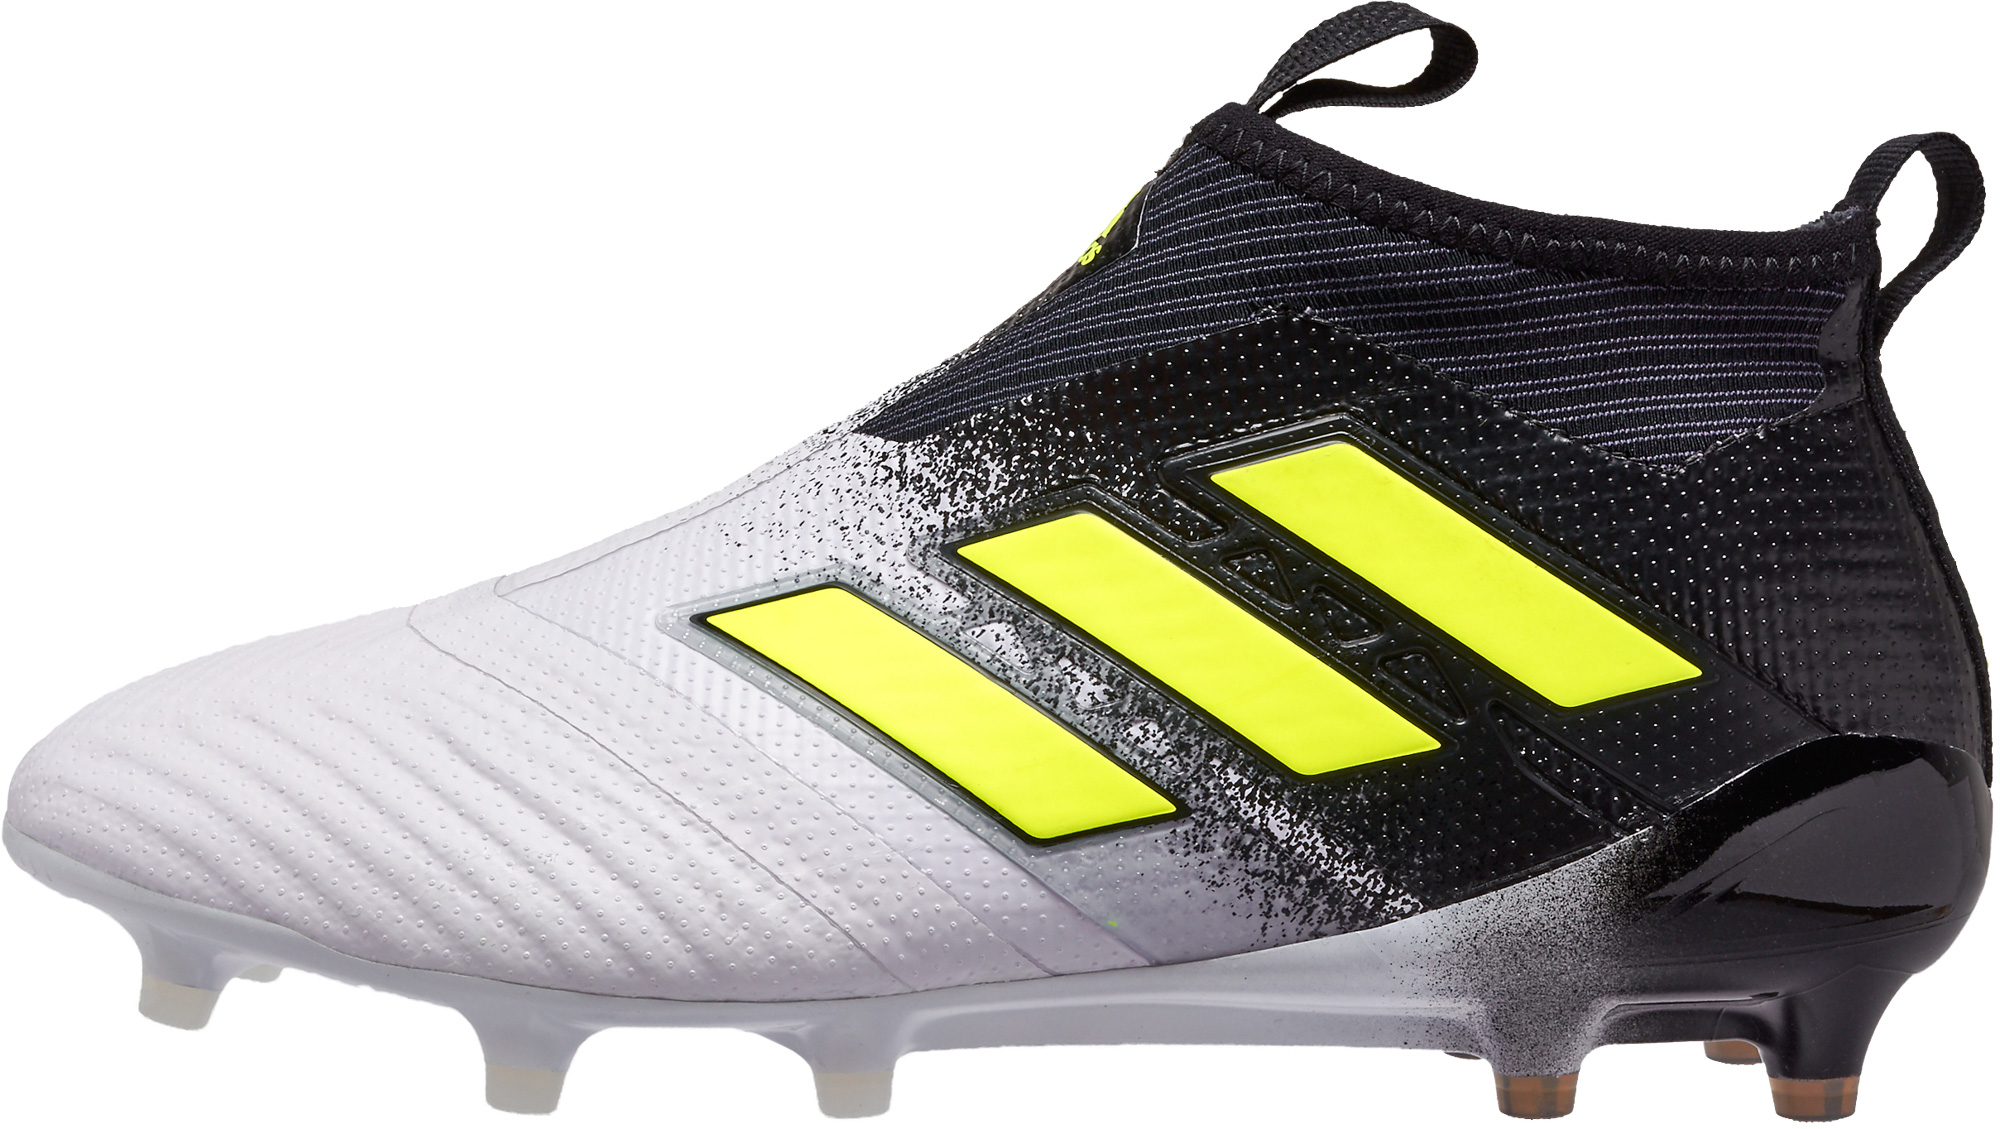 Buy > adidas purecontrol ace 17 > in stock